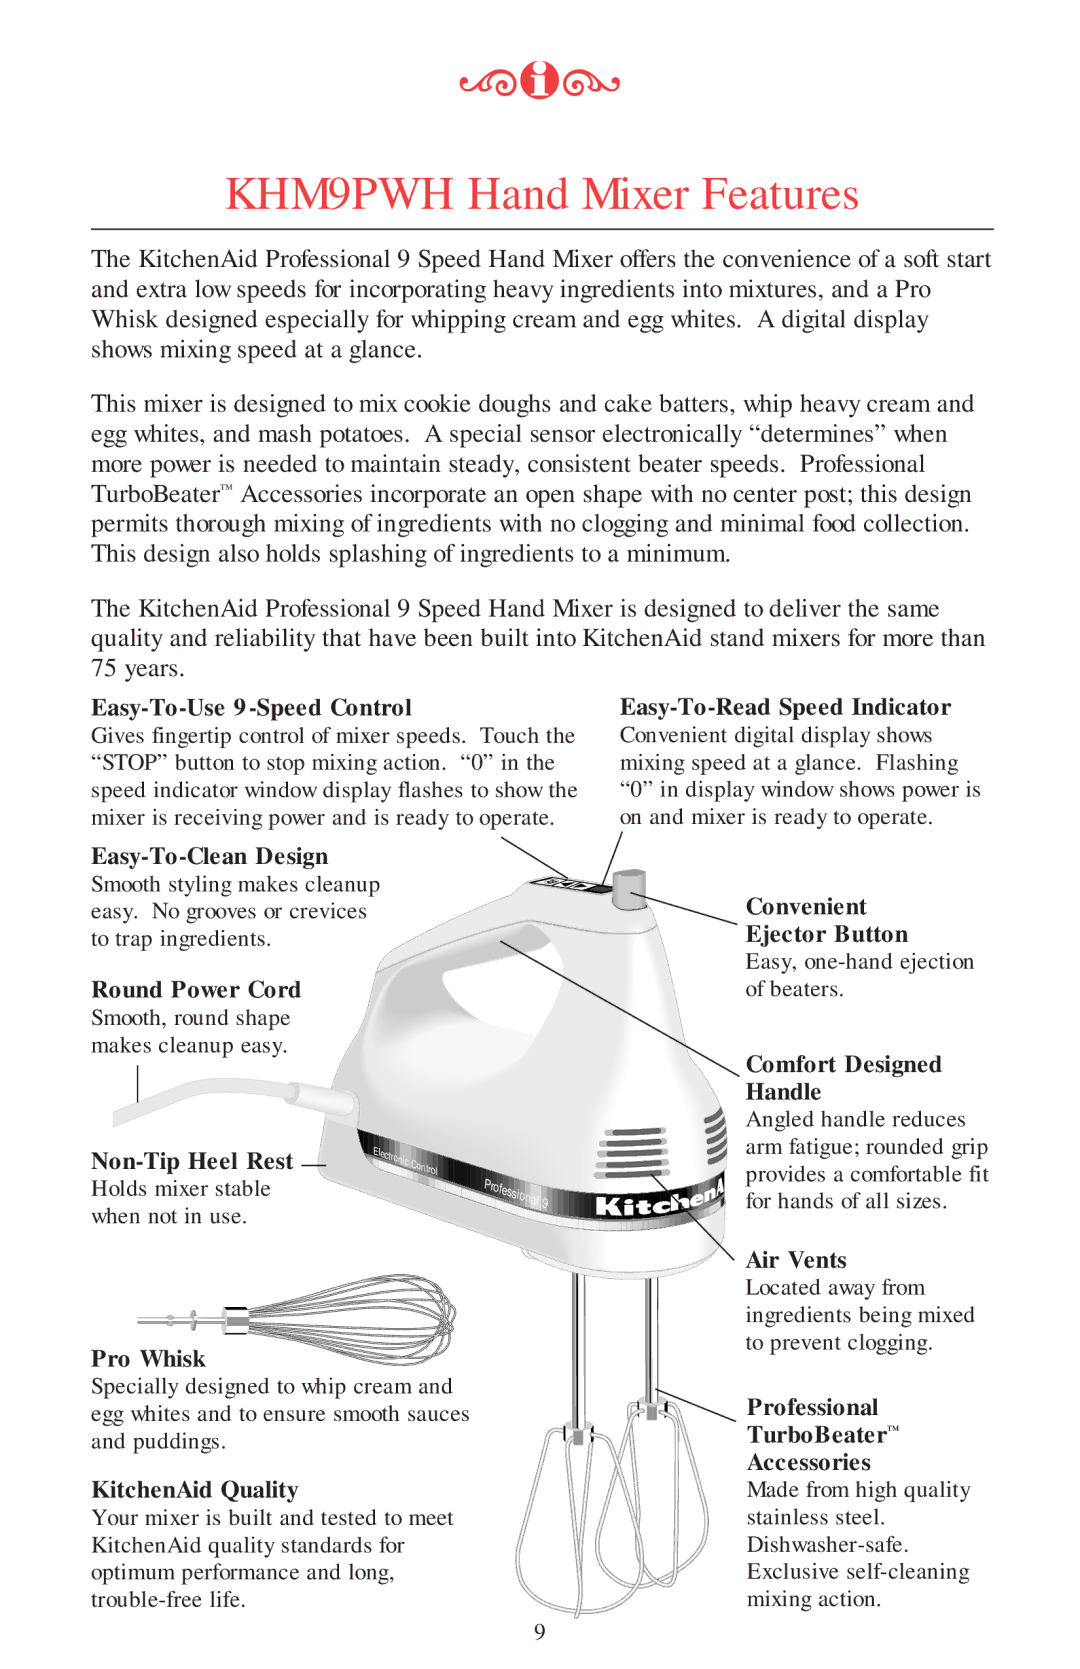 KitchenAid manual KHM9PWH Hand Mixer Features, Easy-To-Use 9-Speed Control 